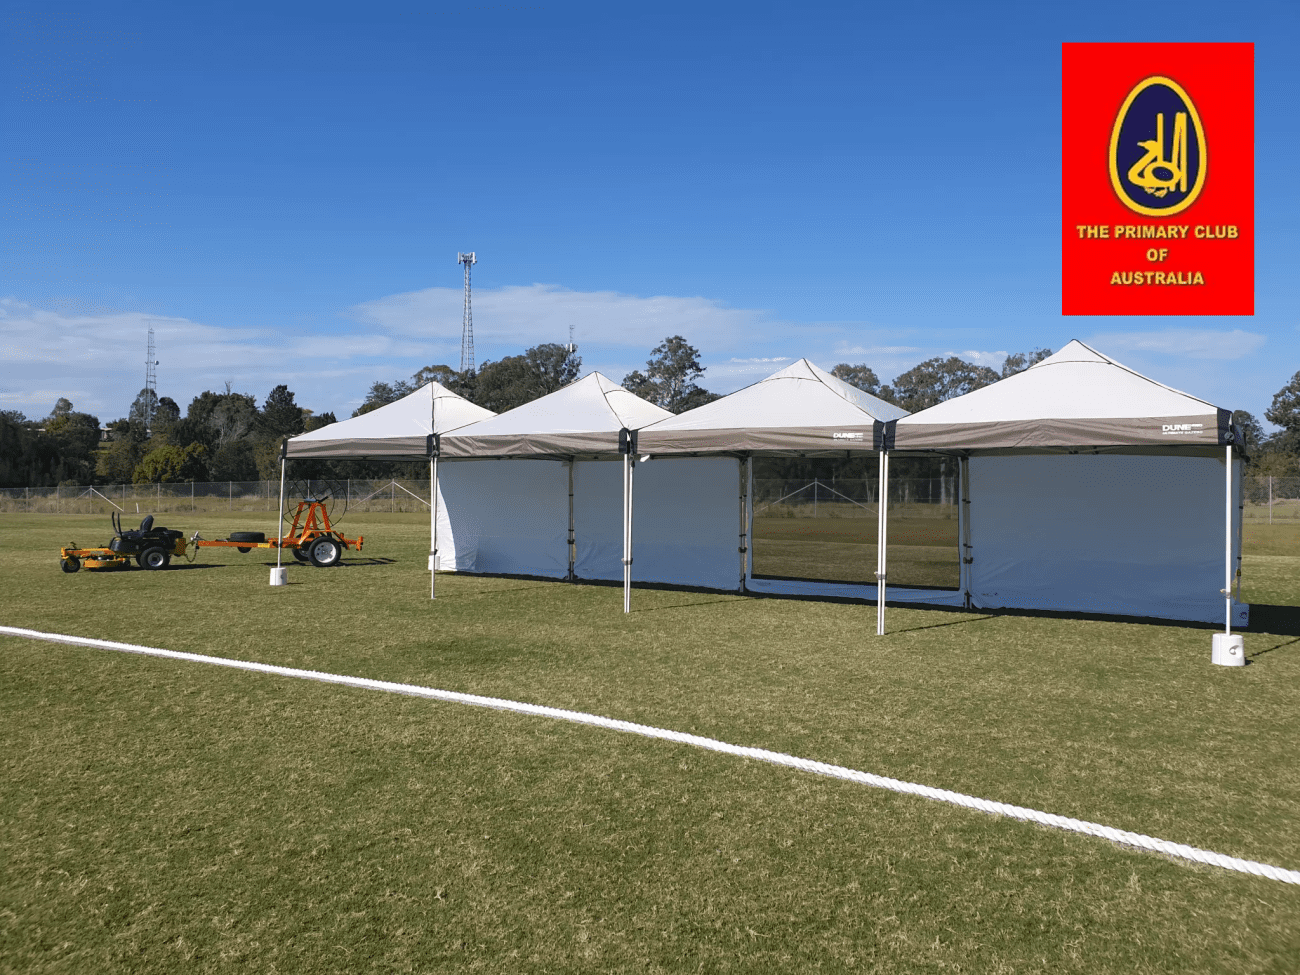 Four 3x3 marquees donated by The Primary Club of Australia